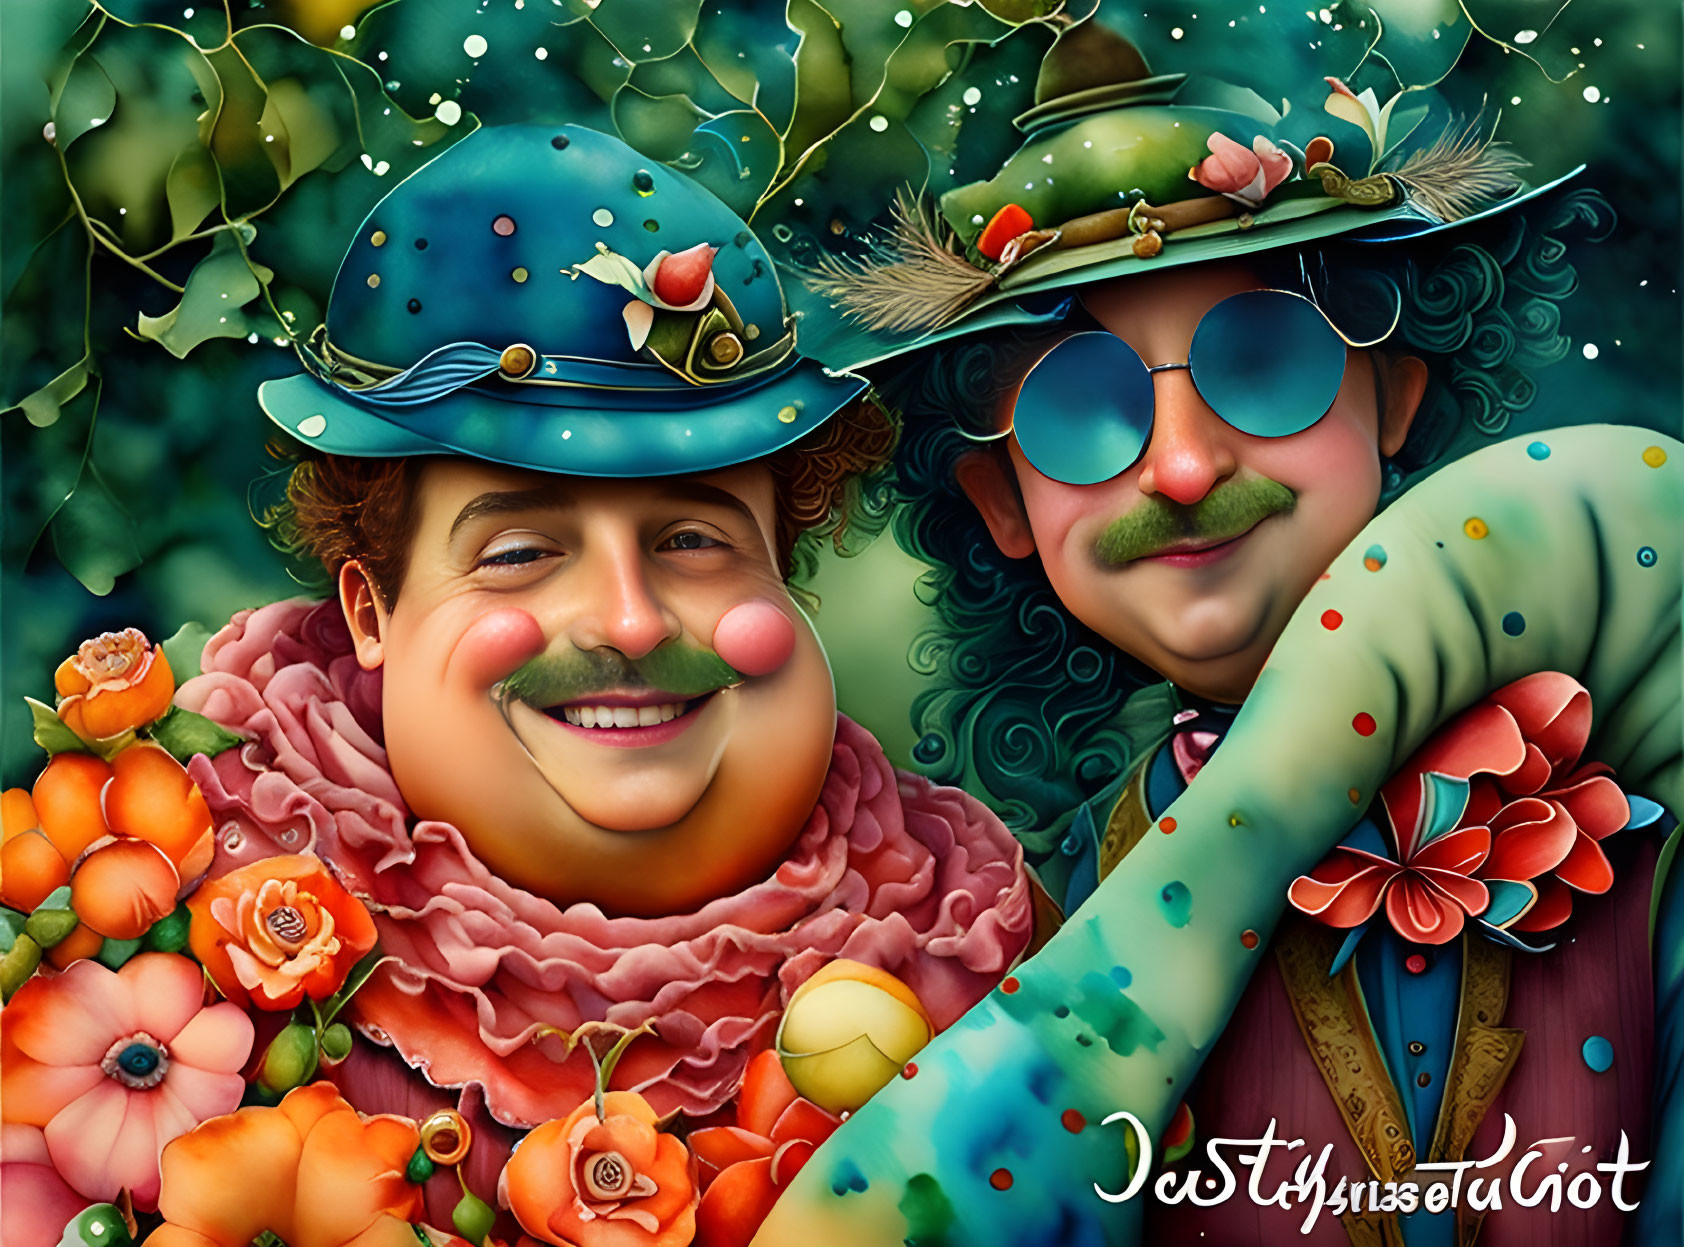 Vibrant illustration of whimsical male characters in colorful attire, surrounded by flowers and fruits